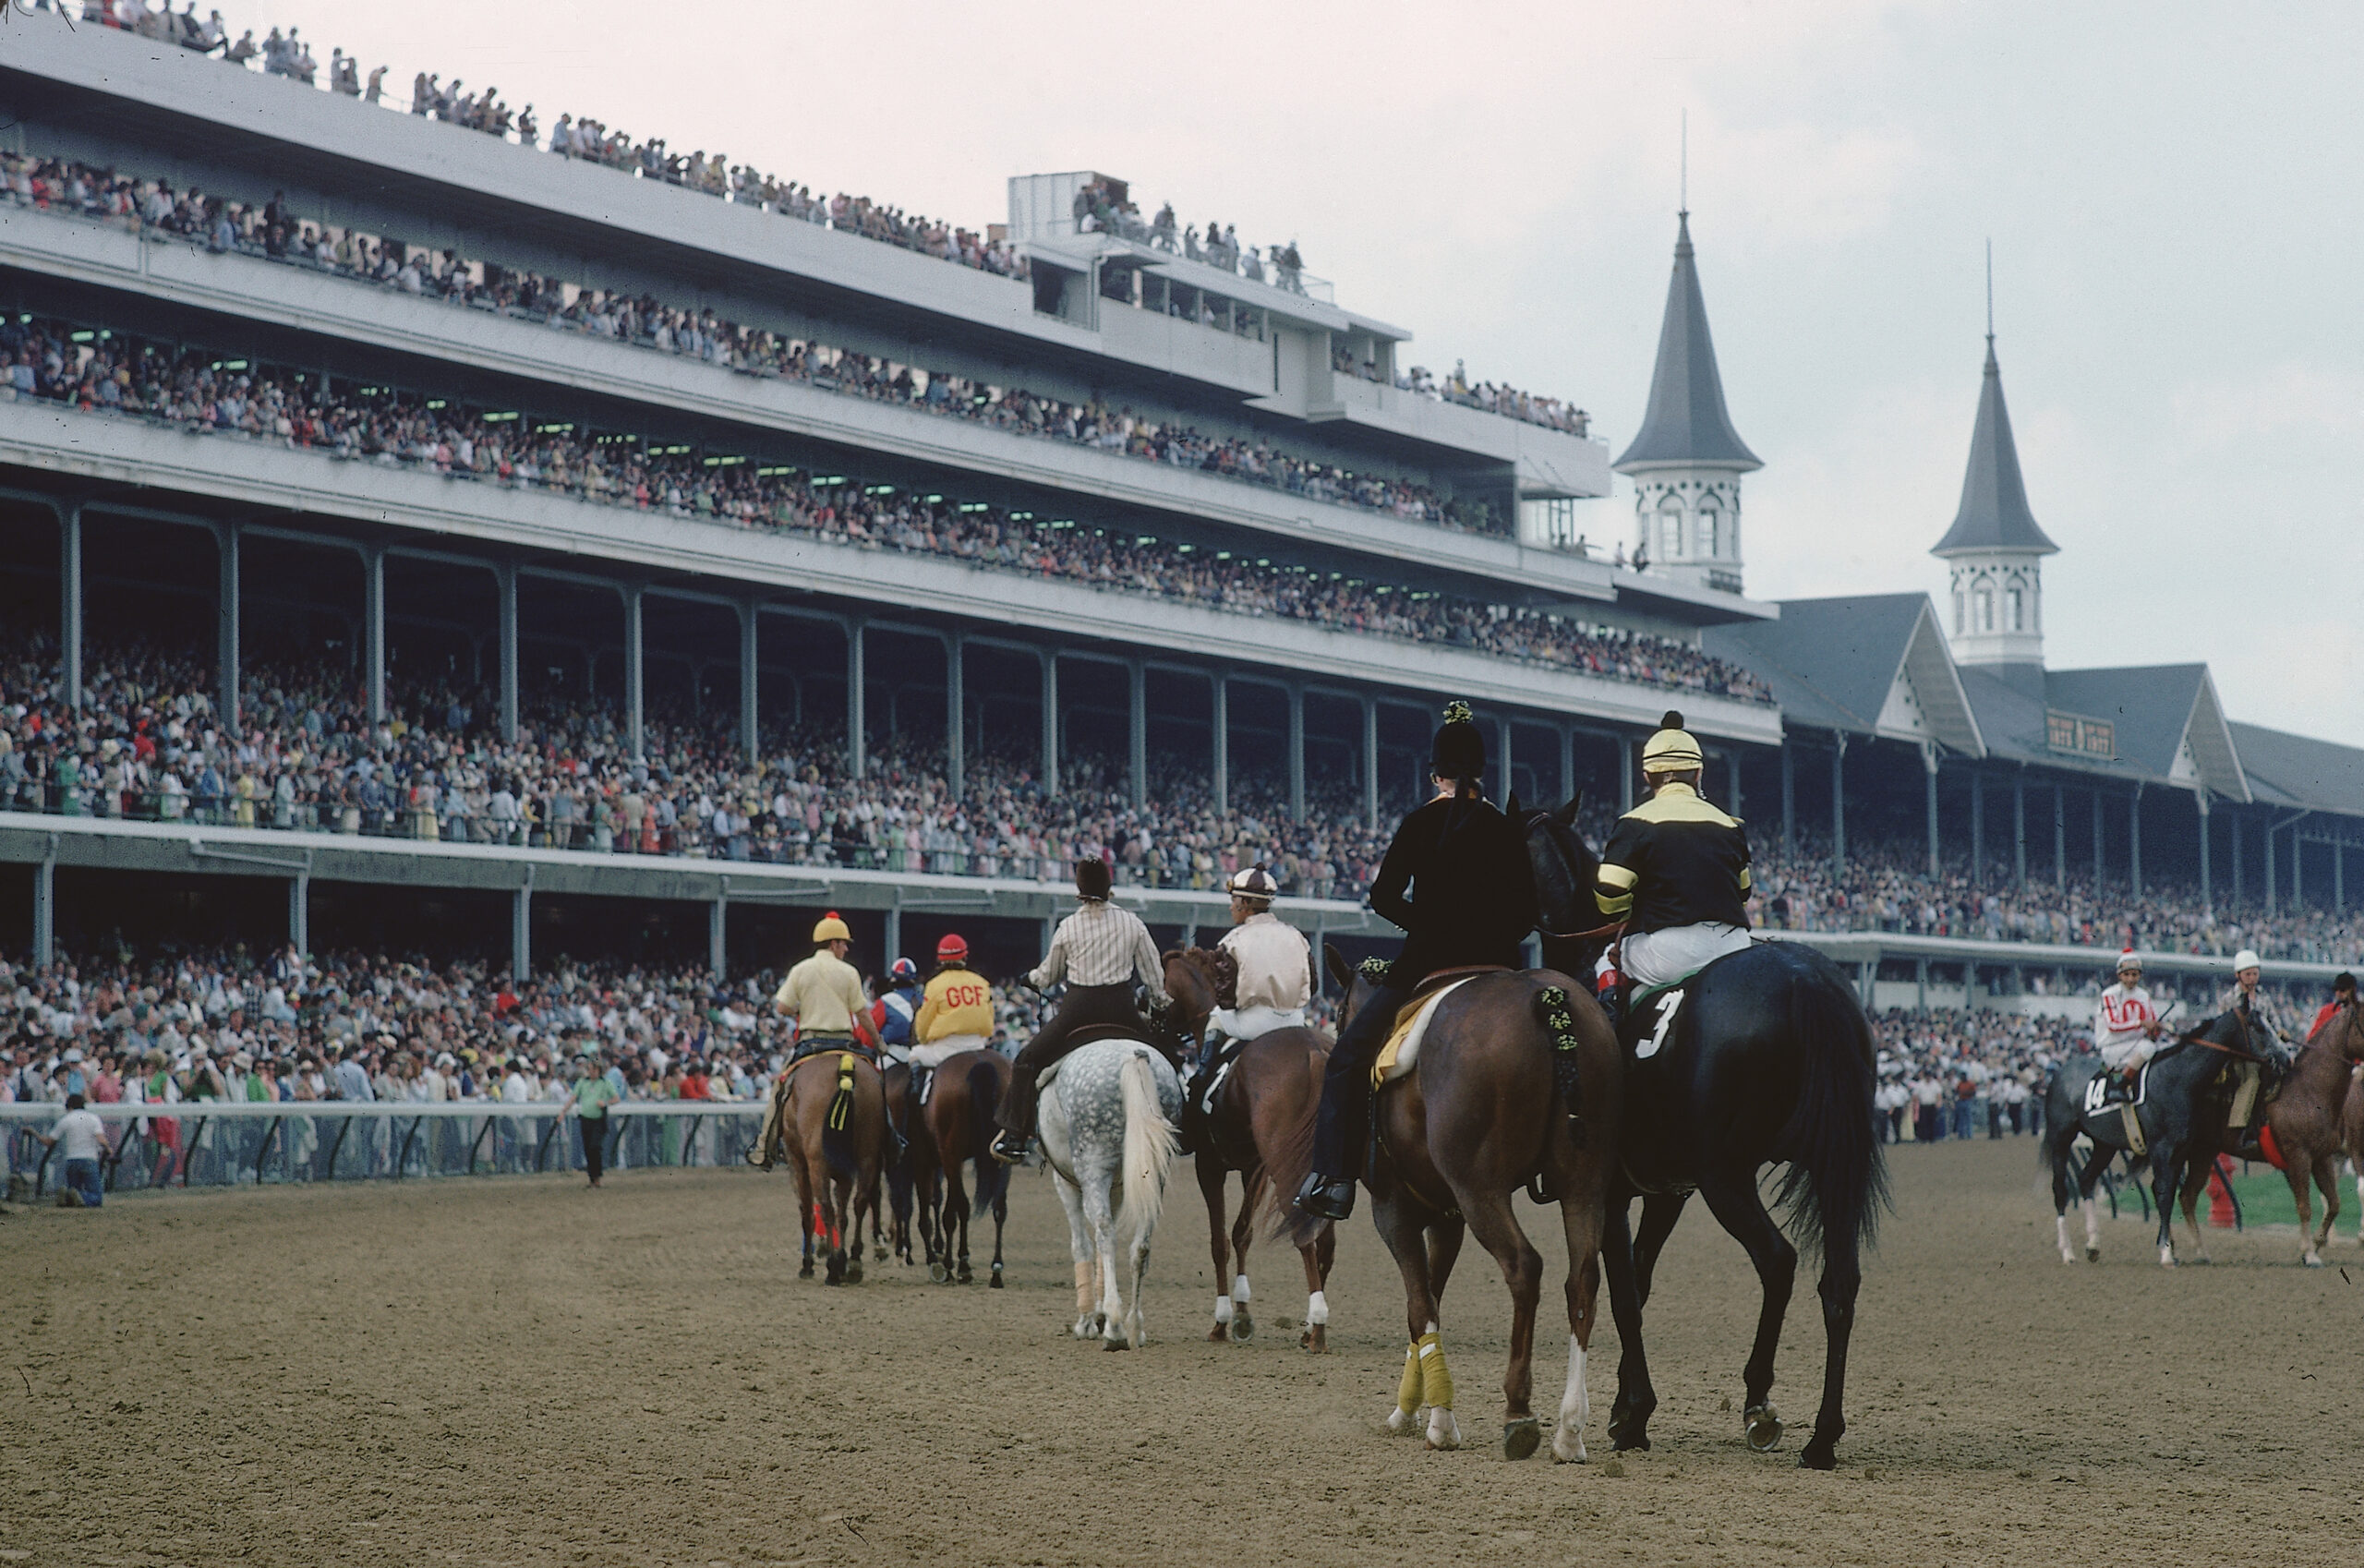 American jockey Jean Cruguet rides thoroughbred racehorse Seattle Slew (#3) onto the track before the start of the Kentucky Derby at Churchill Downs, Louisville, Kentucky, May 7, 1977. (Photo Credit: Robert Riger/Getty Images)